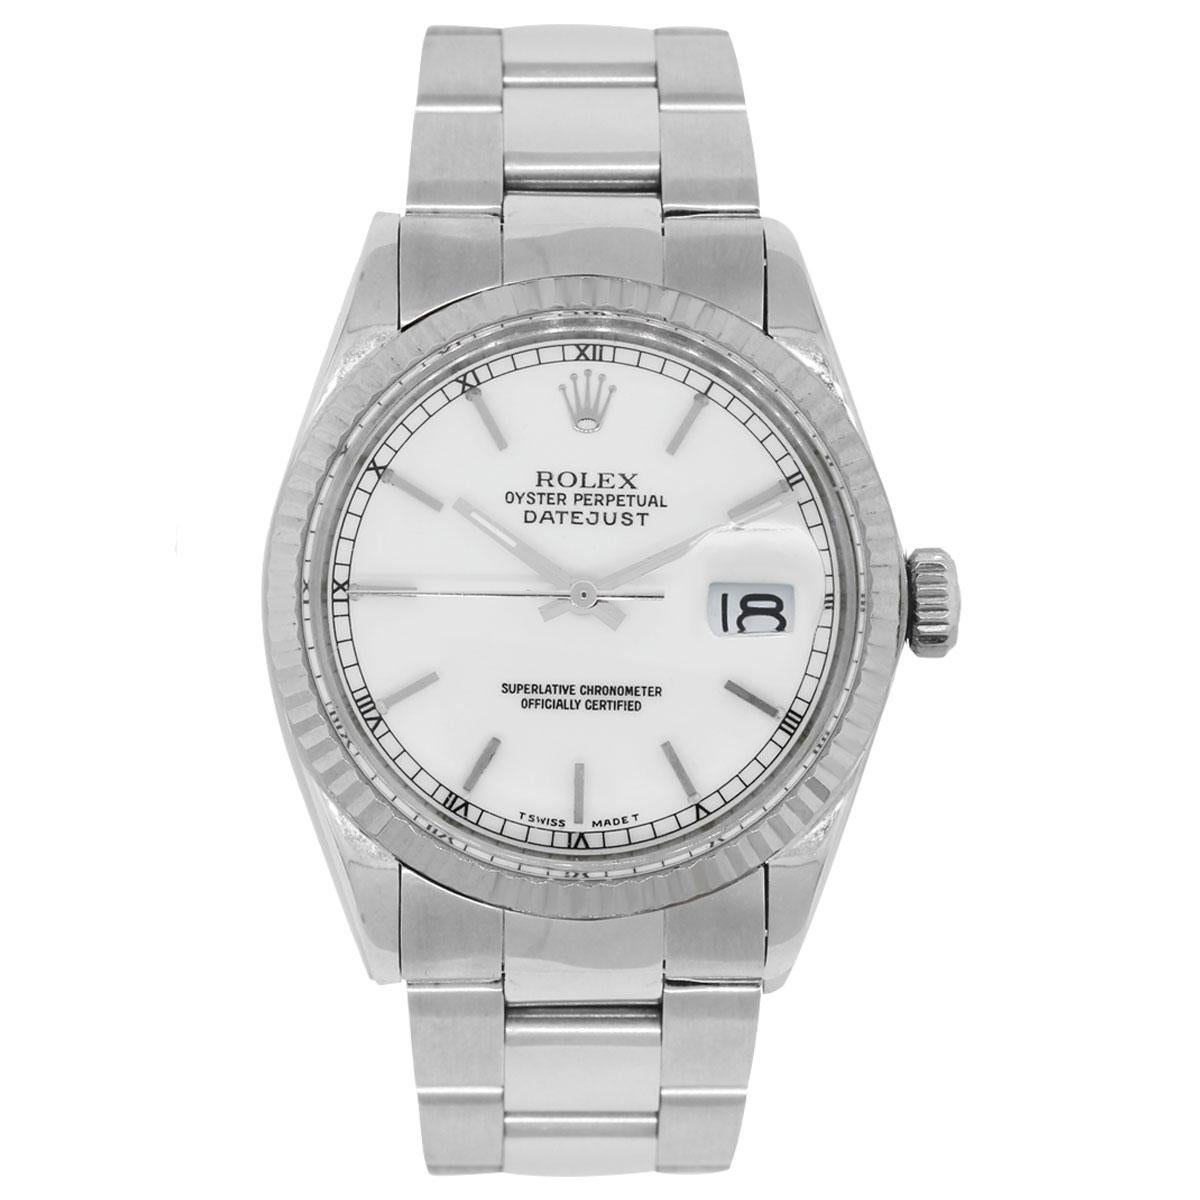 Brand: Rolex
MPN: 16014
Model: Datejust
Case Material: Stainless Steel
Case Diameter: 36mm
Crystal: Plastic
Bezel: Stainless steel fixed fluted bezel
Dial: White dial with silver sticks and hour markers. Date is indicated at 3 o’ clock.
Bracelet: